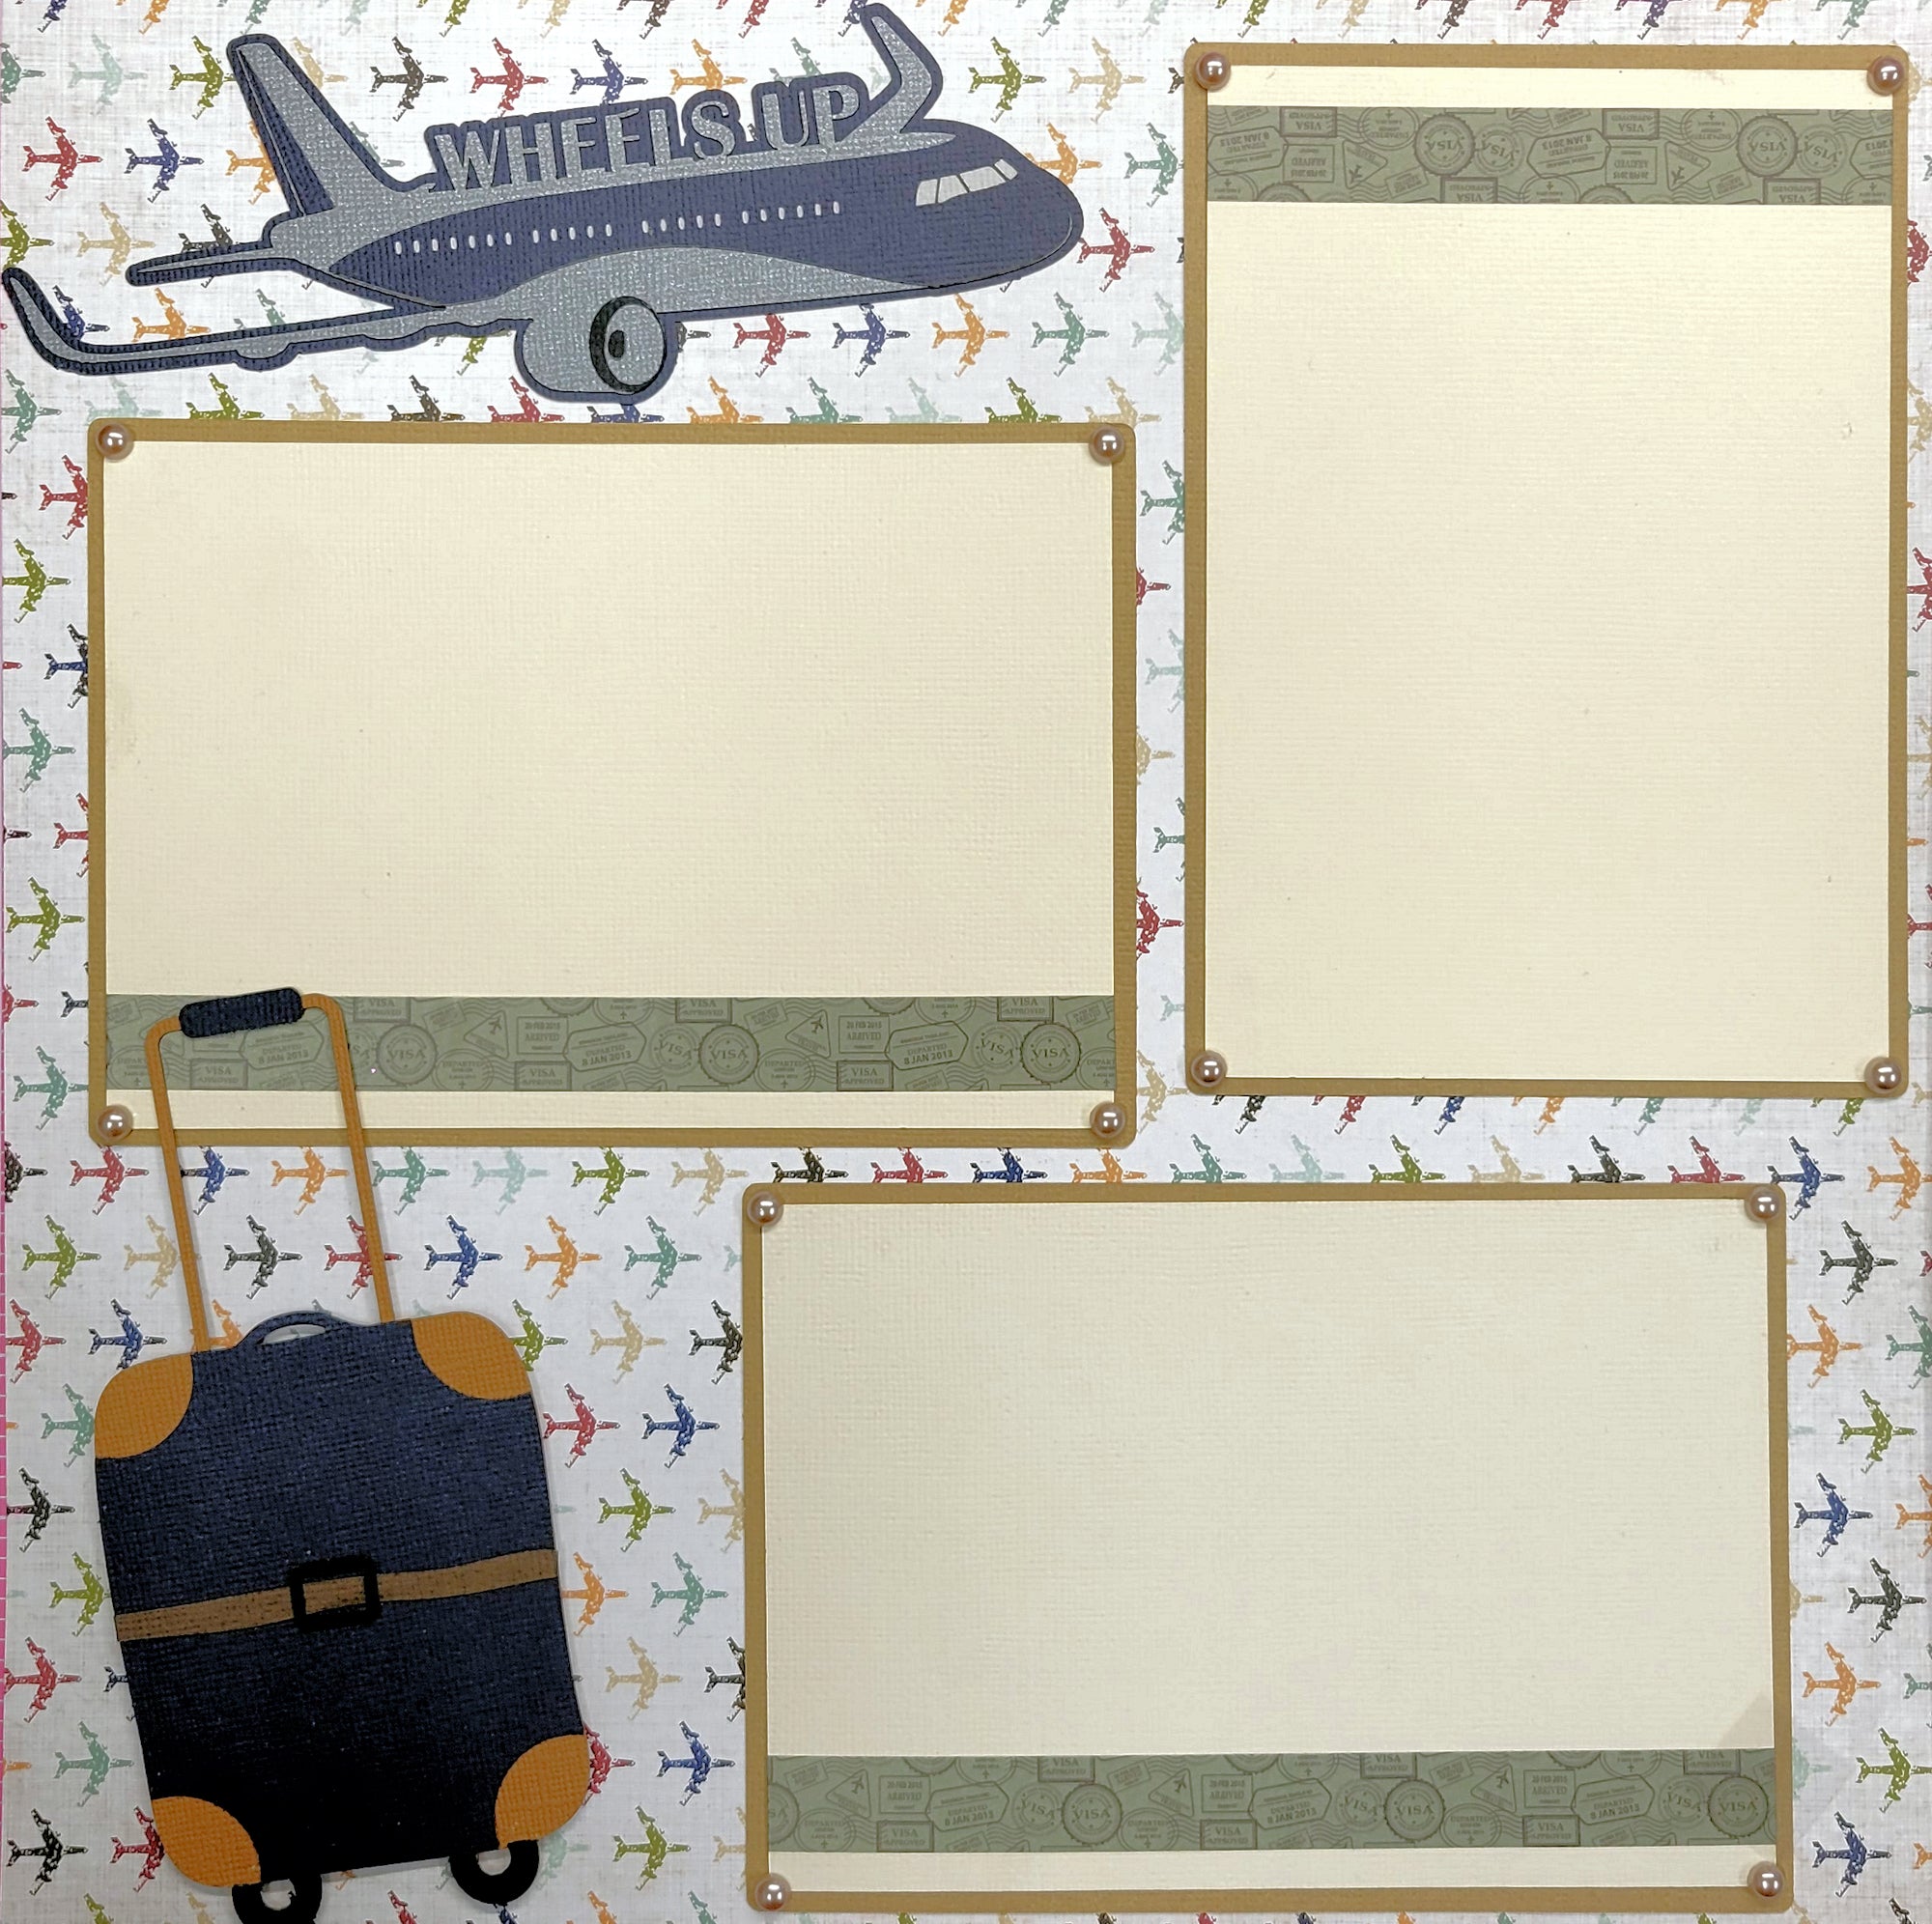 Wheels Up Airplane Travel (2) - 12 x 12 Pages, Fully-Assembled & Hand-Crafted 3D Scrapbook Premade by SSC Designs